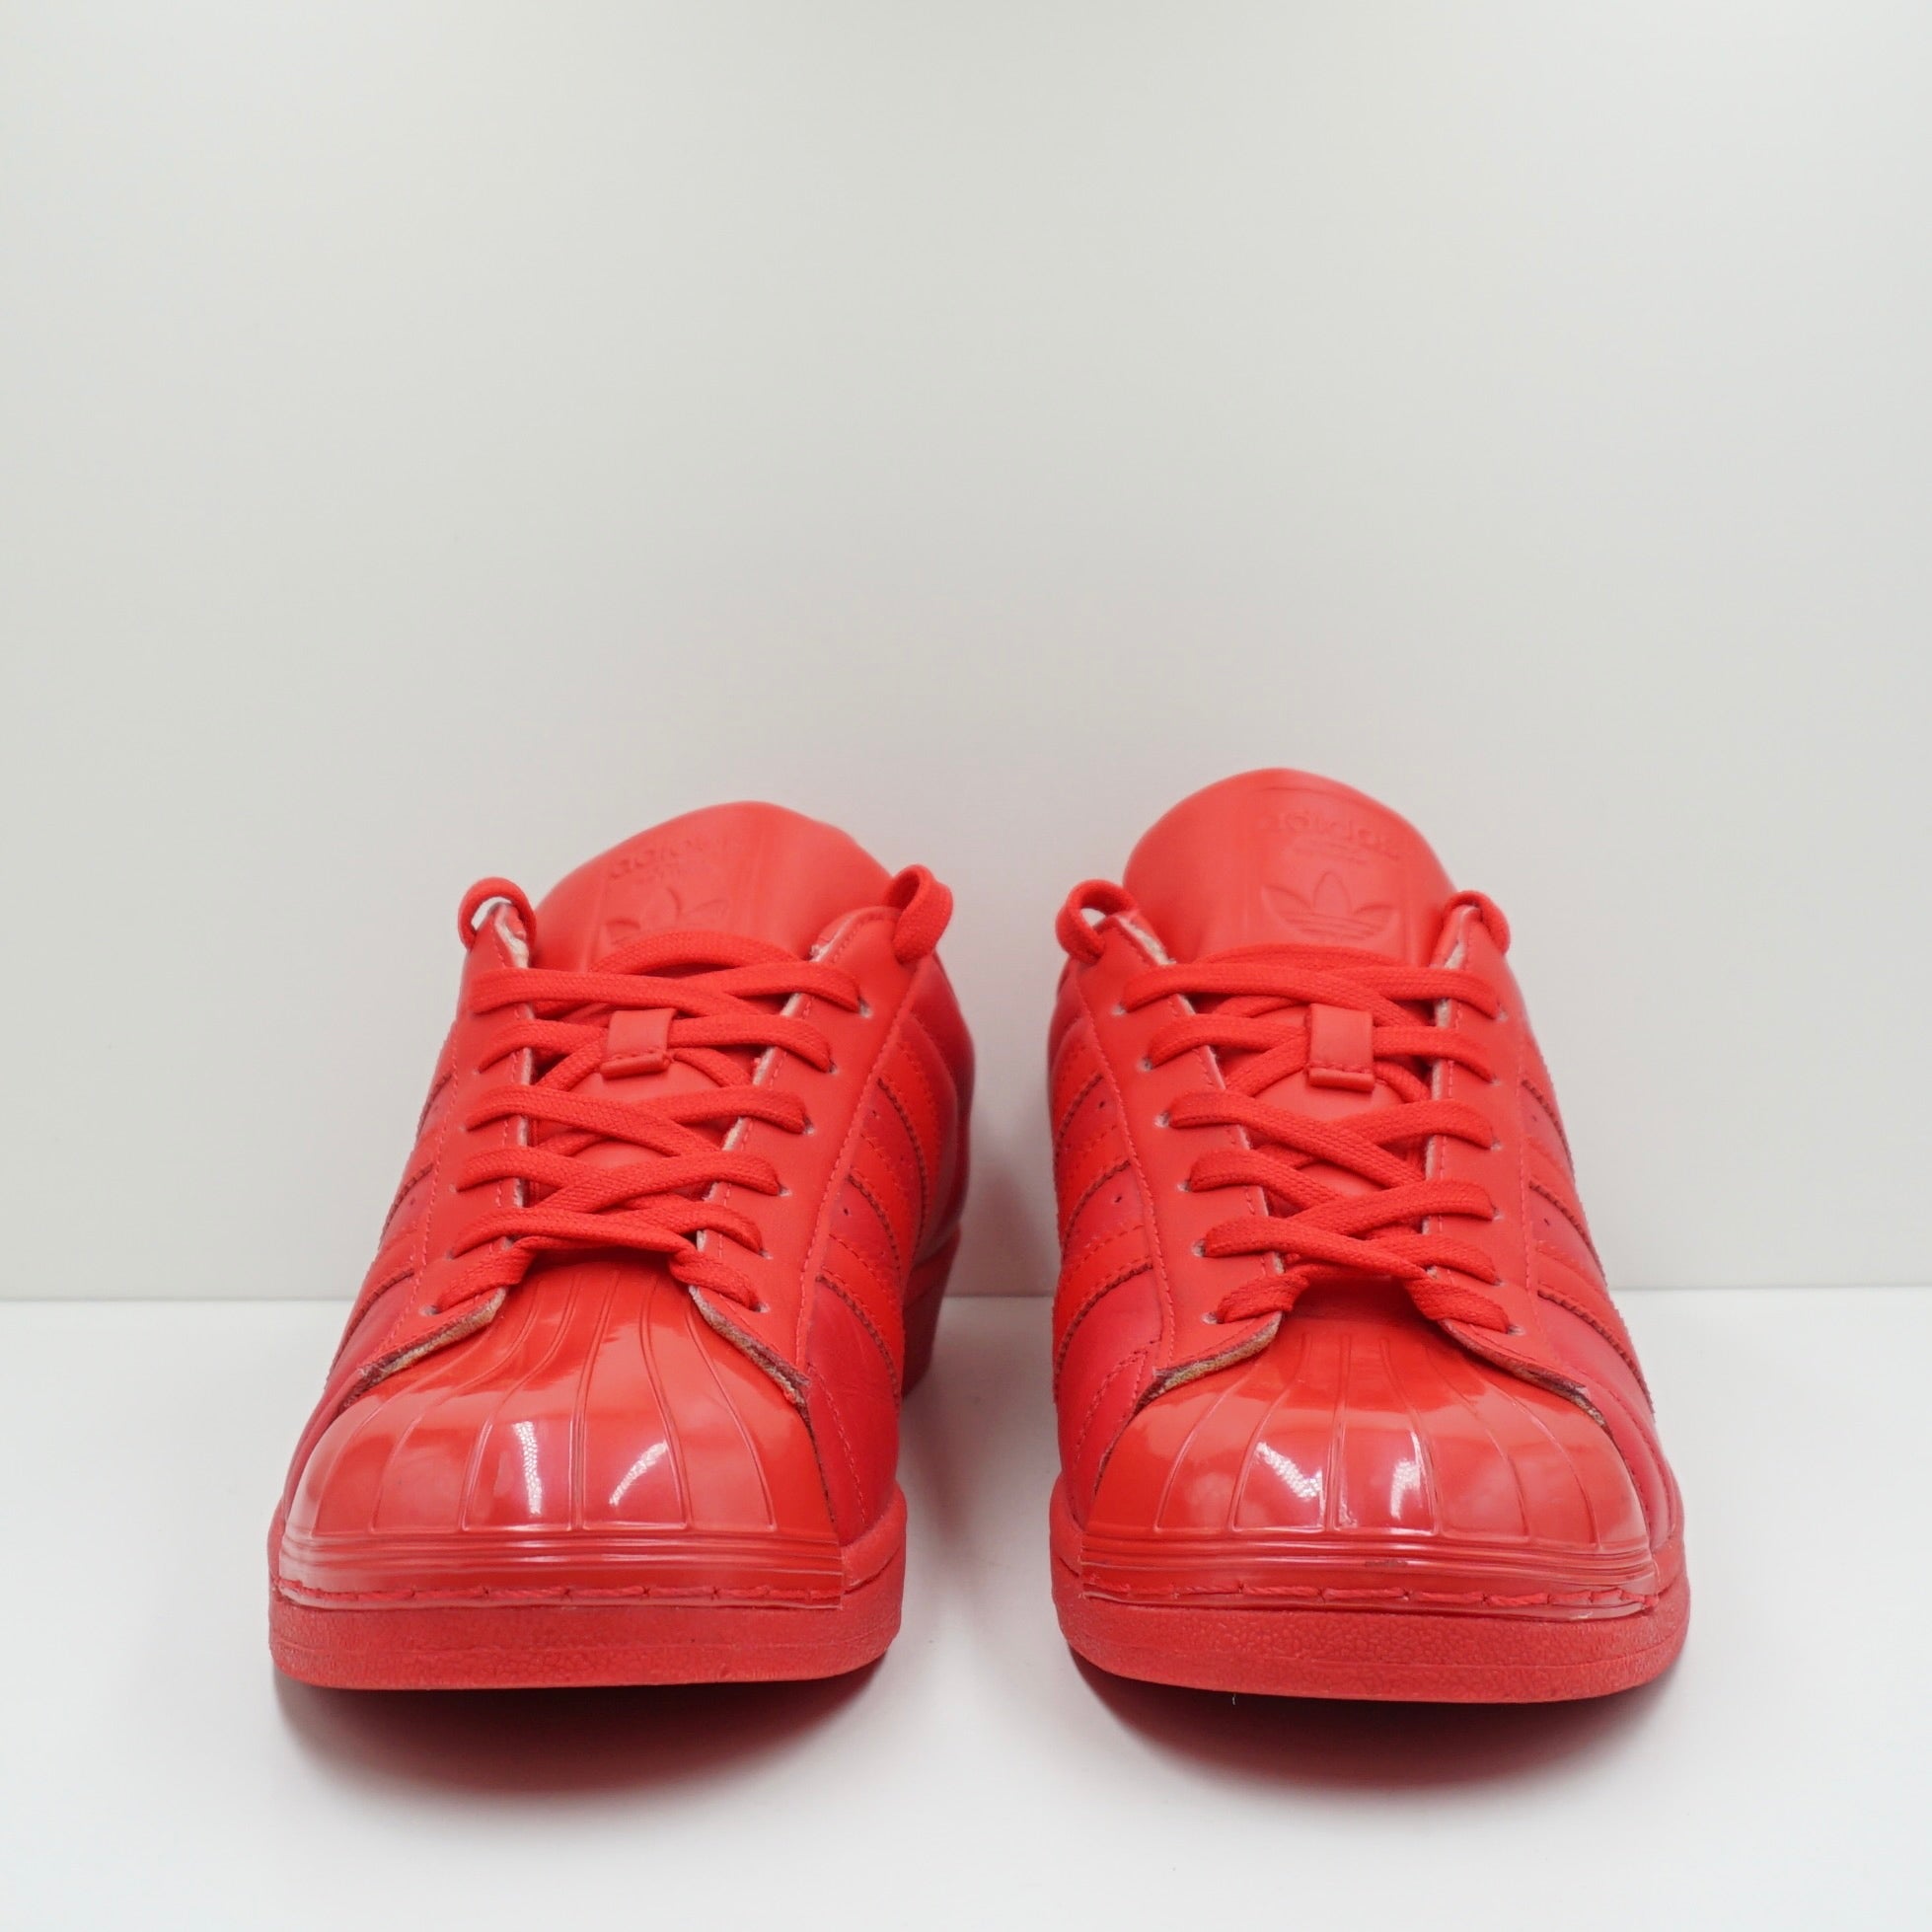 Adidas Superstar Glossy Toe Ray Red (W)